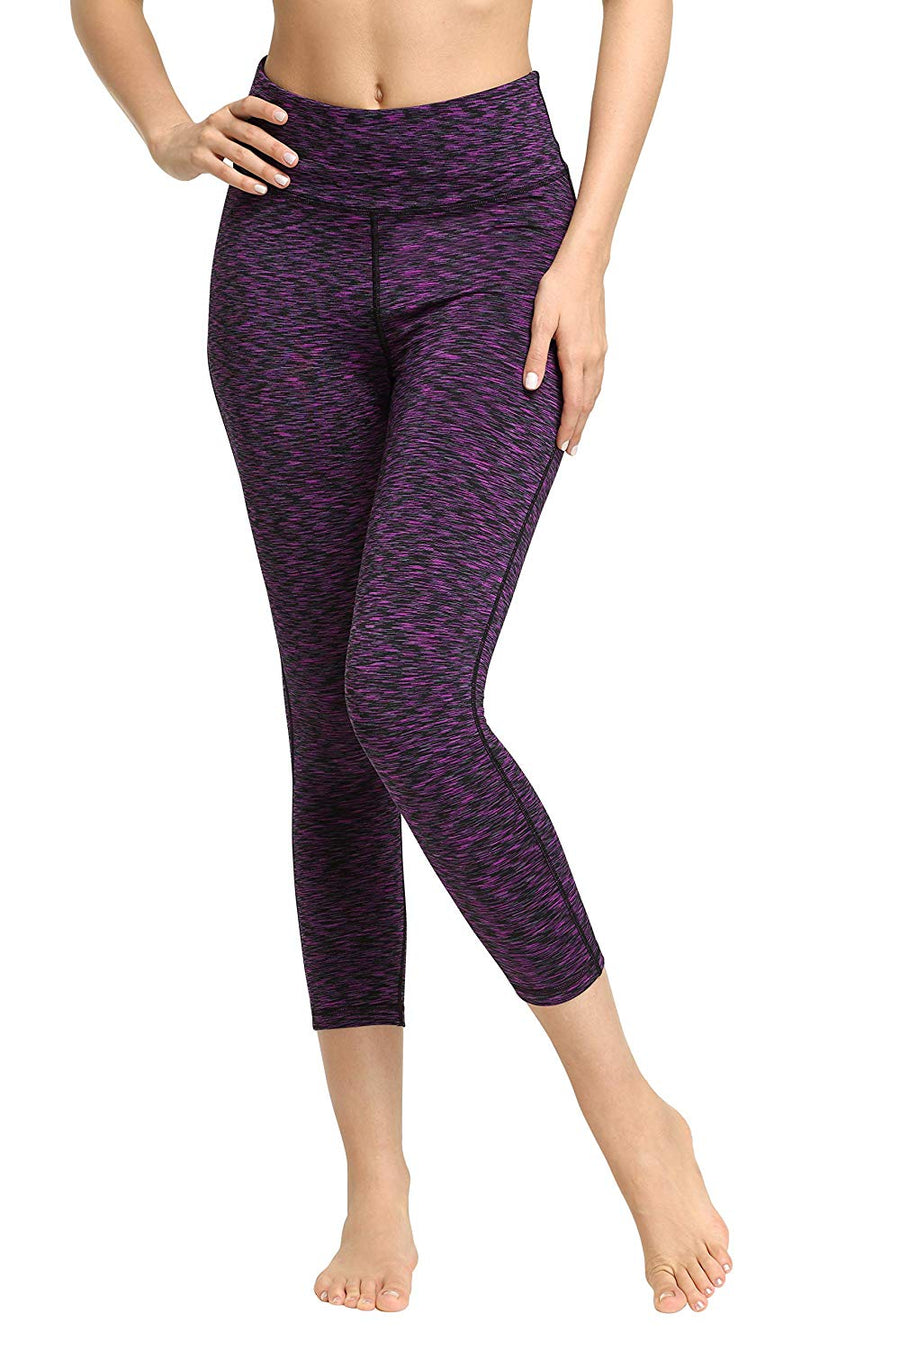 RQYYD Clearance Workout Leggings for Women Yoga Pants Leisure Stretch  Fitness Fake Two Pieces Sports Leggings with Pocket(Purple,XL) 